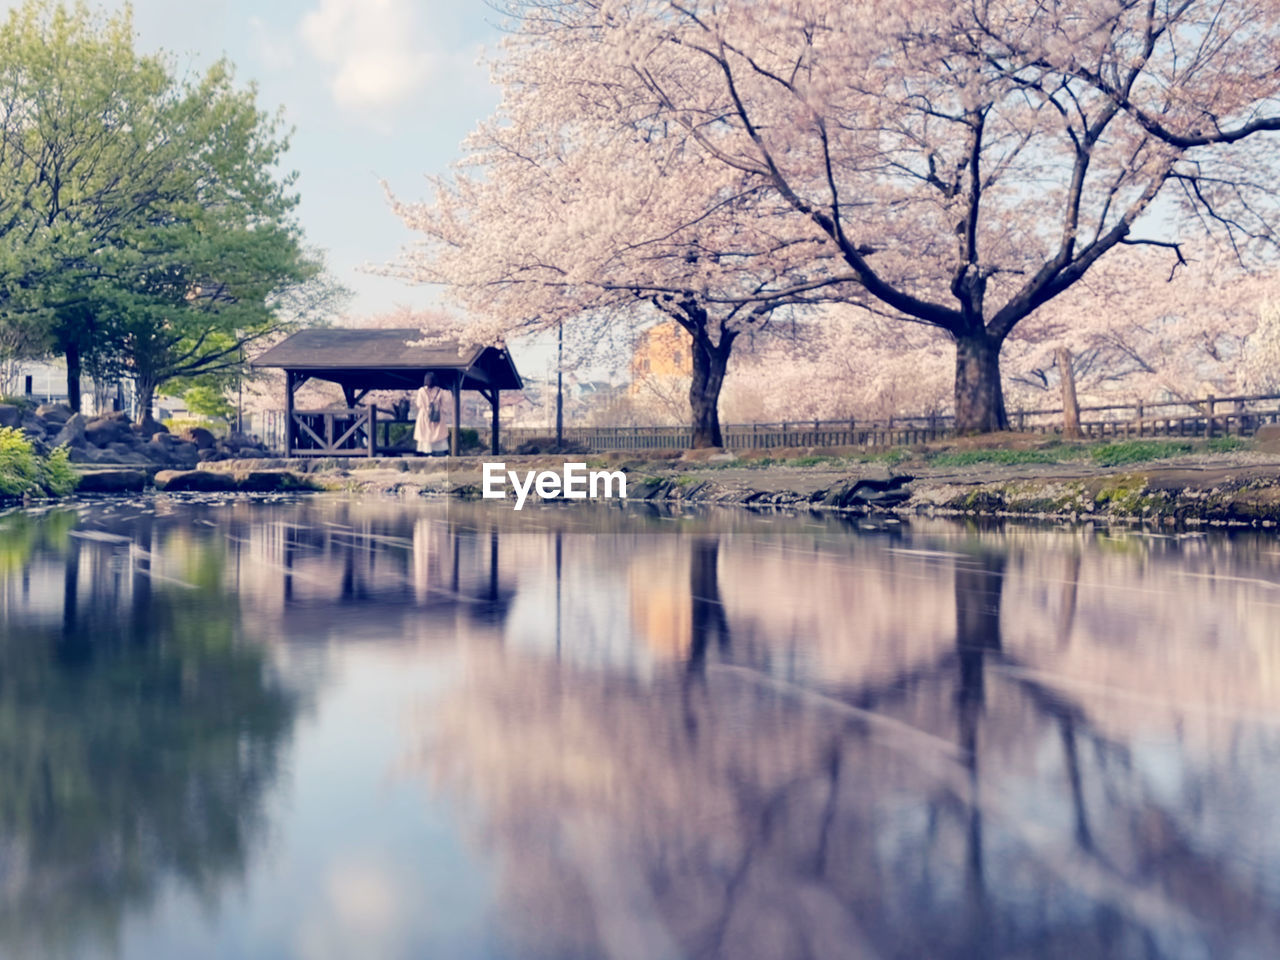 tree, reflection, plant, water, flower, nature, lake, beauty in nature, architecture, winter, sky, morning, no people, tranquility, built structure, autumn, branch, springtime, outdoors, day, bare tree, scenics - nature, landscape, tranquil scene, spring, building exterior, environment, blossom, building, cloud, waterfront